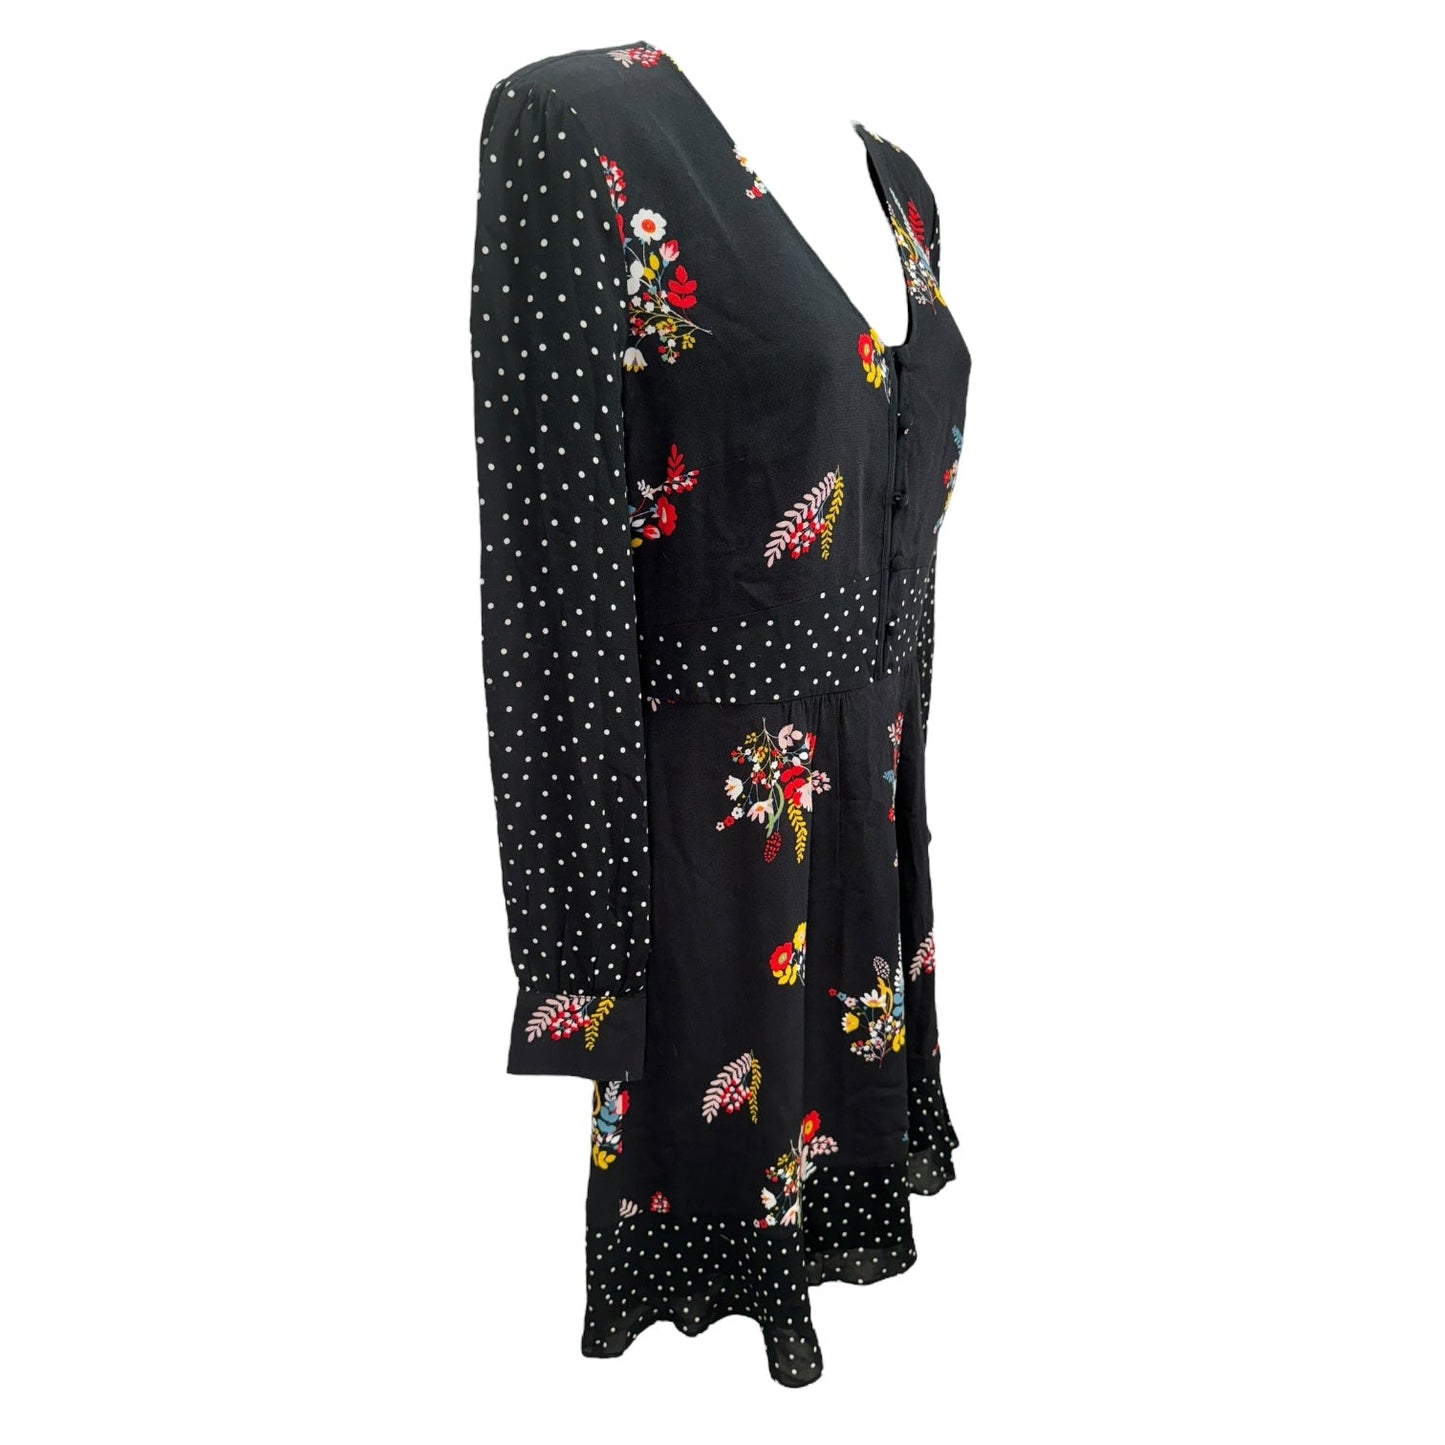 Ivy Dress in Black Country Posy
 Boden, Size 6